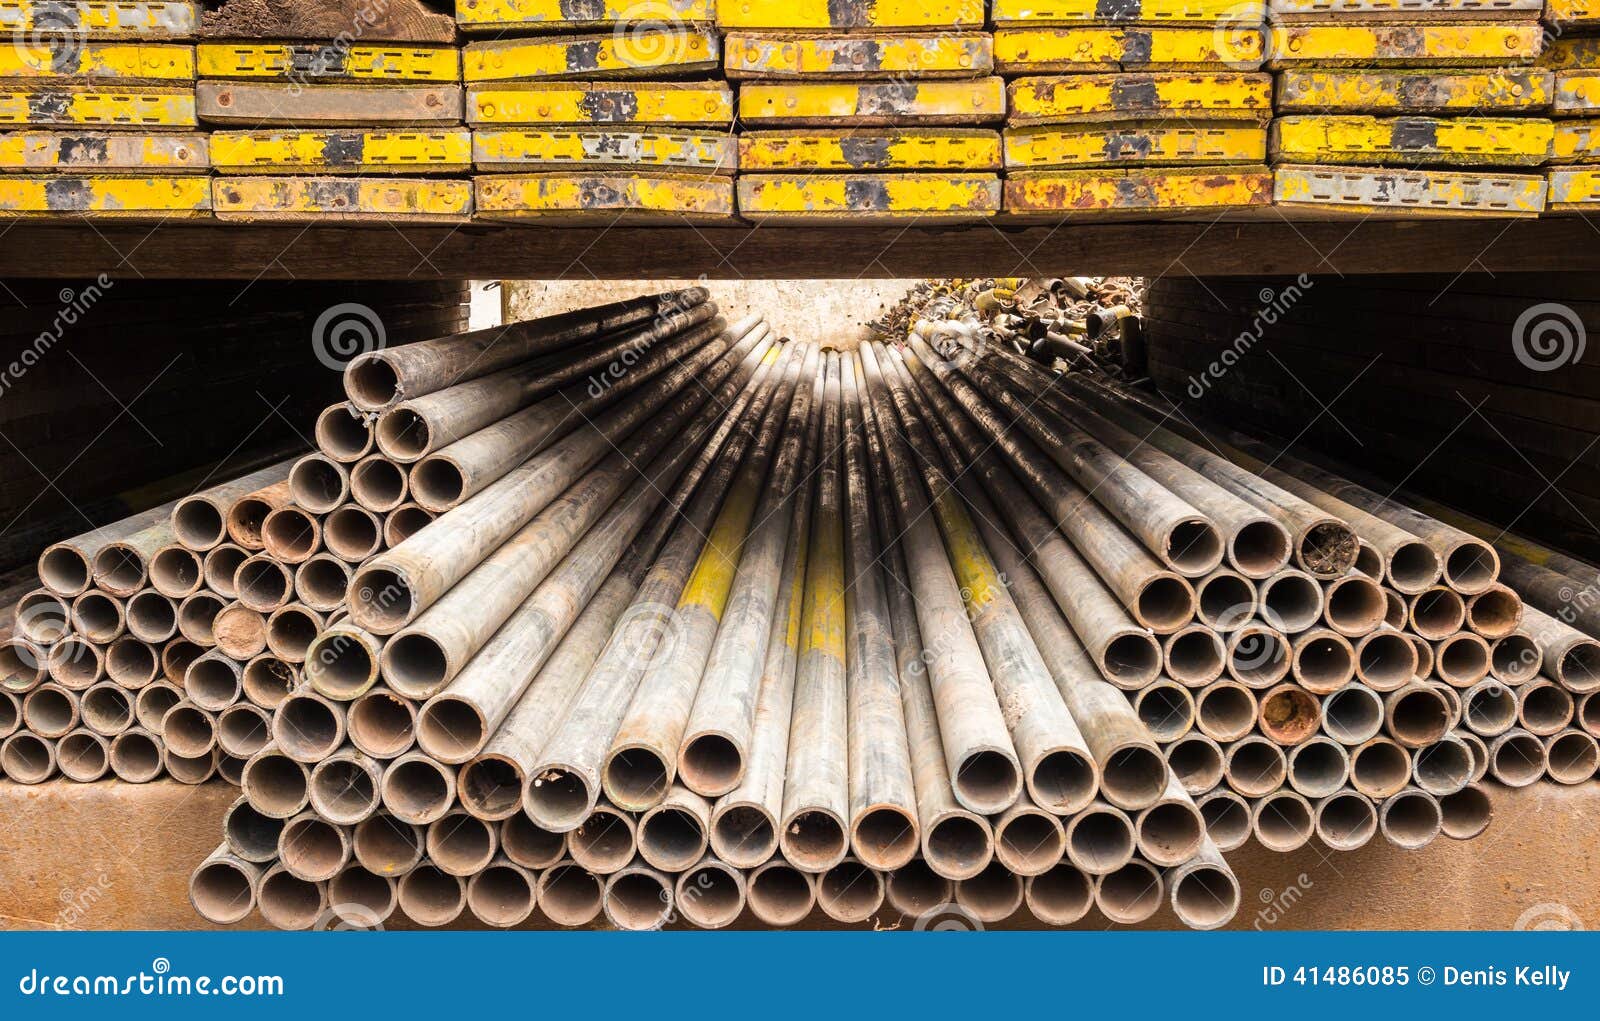 scaffolding poles and boards